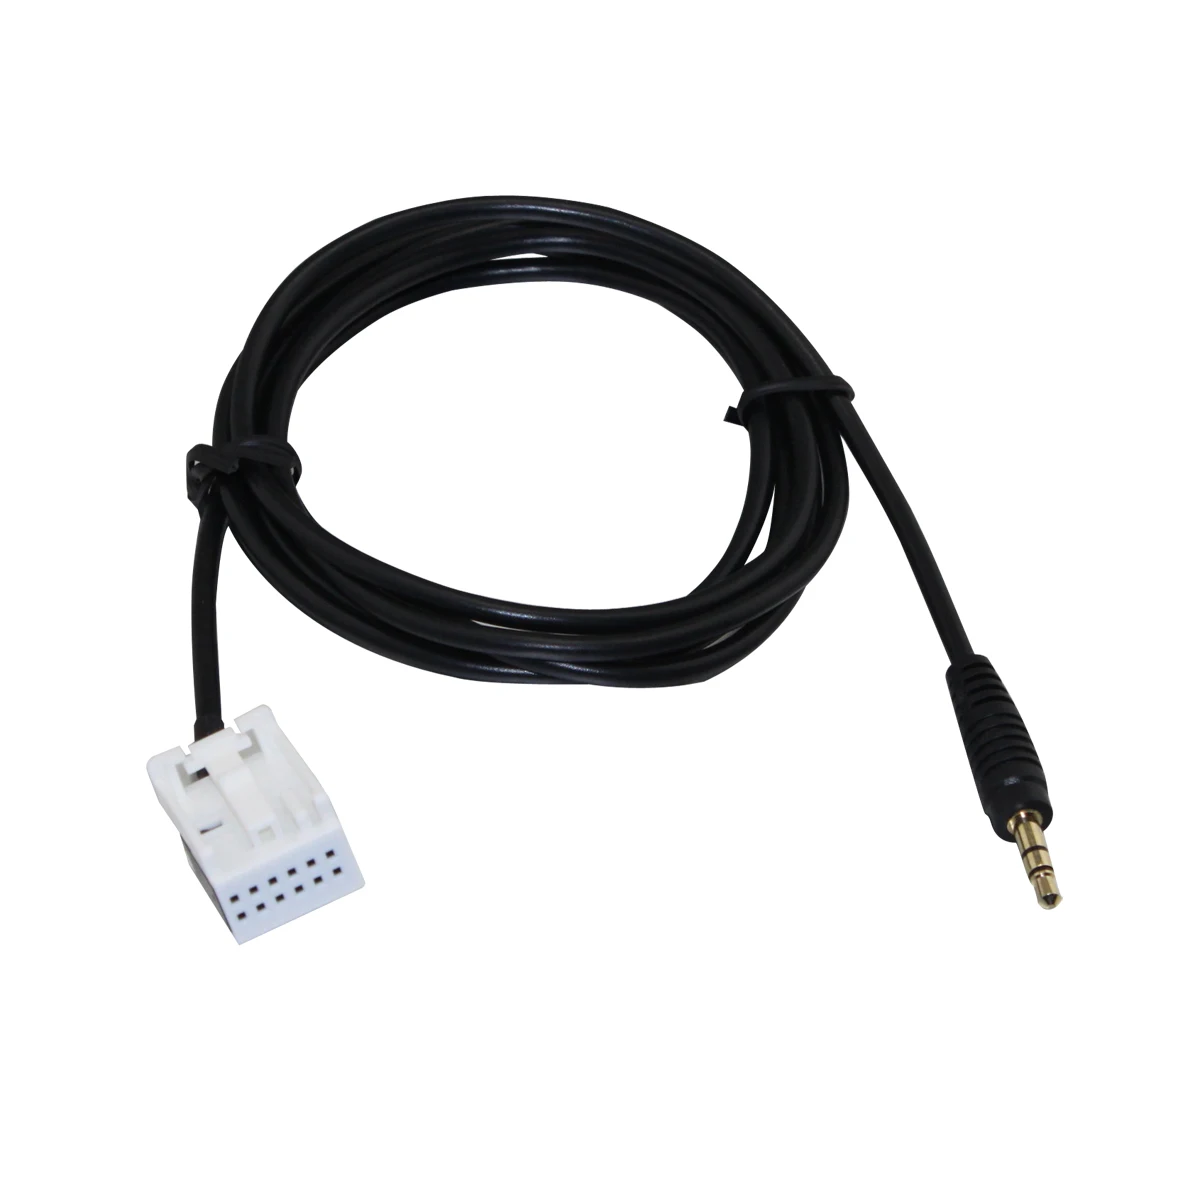 Car Aux cable for VW 2006 and up radio 3.5mm plug 150cm long